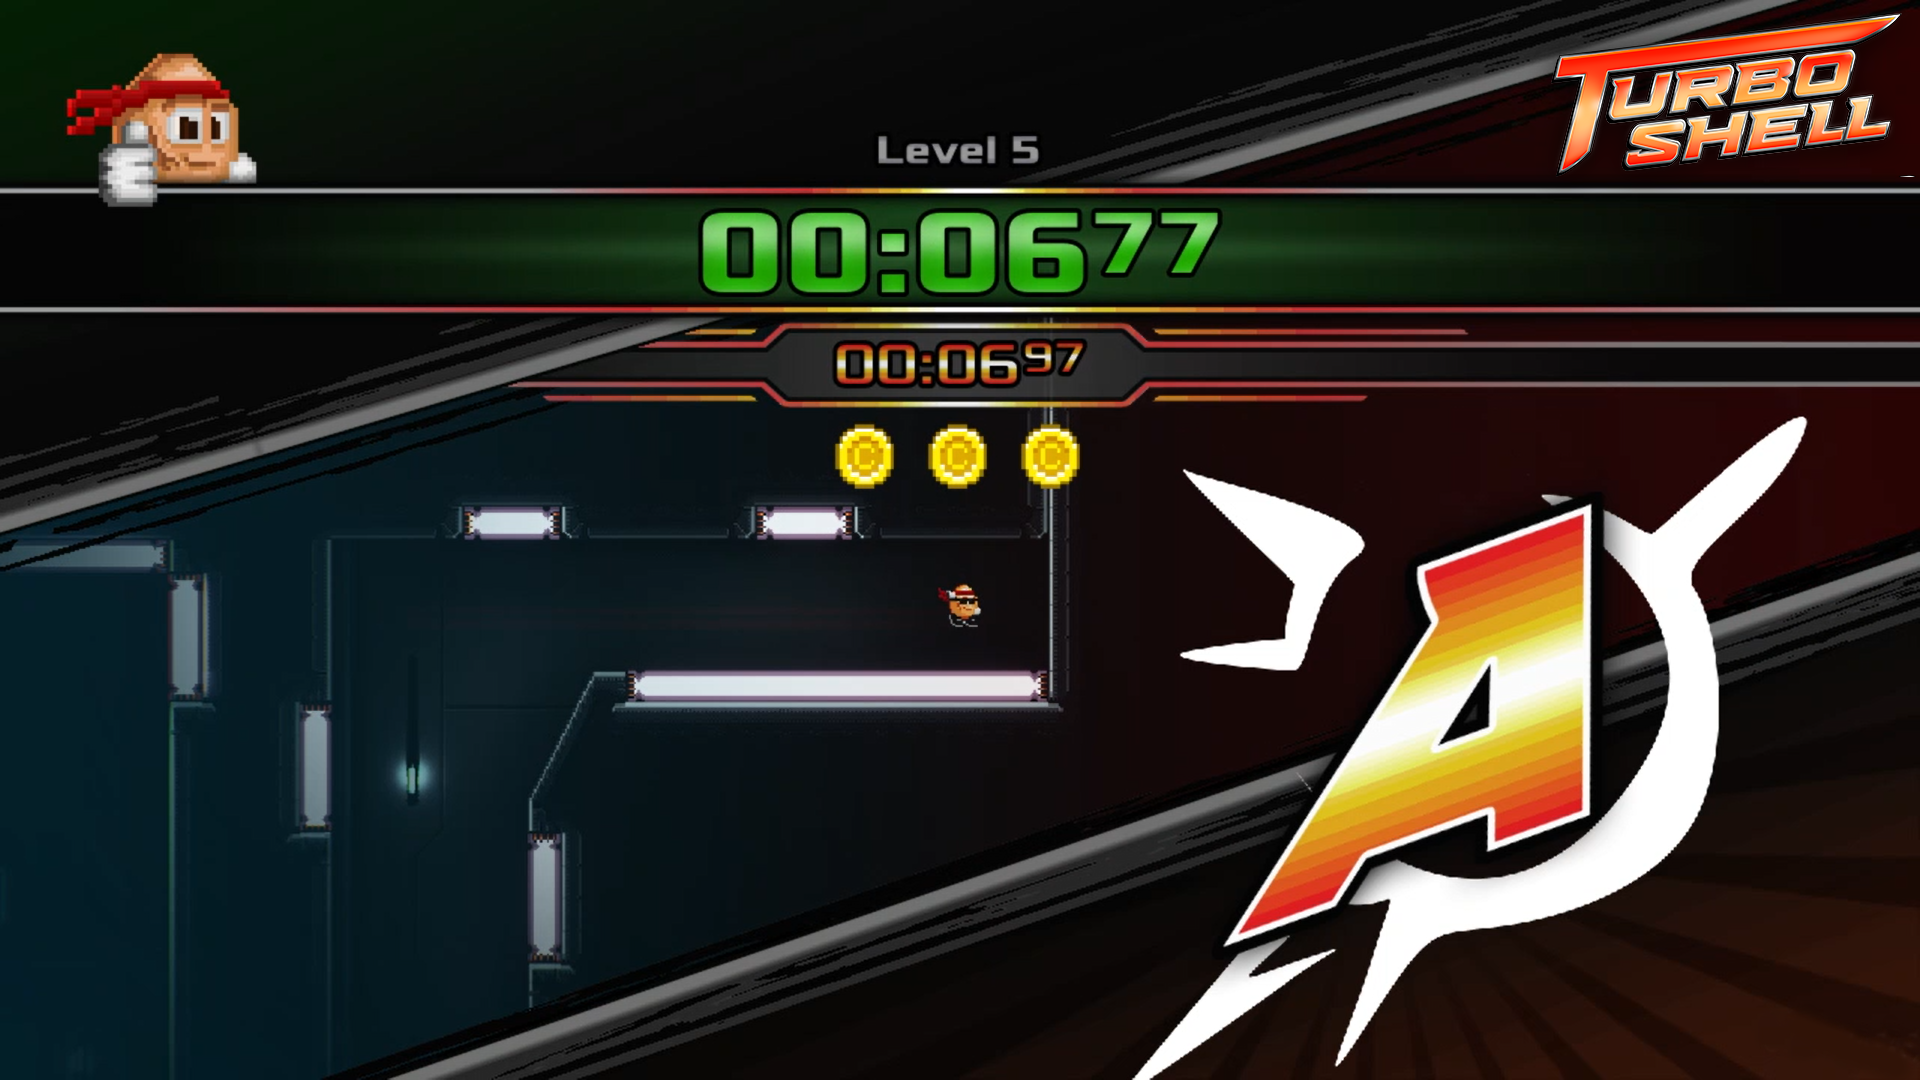 Since Turbo Shell is all about speed, the player can instantly see their playtime per level in the endscreen